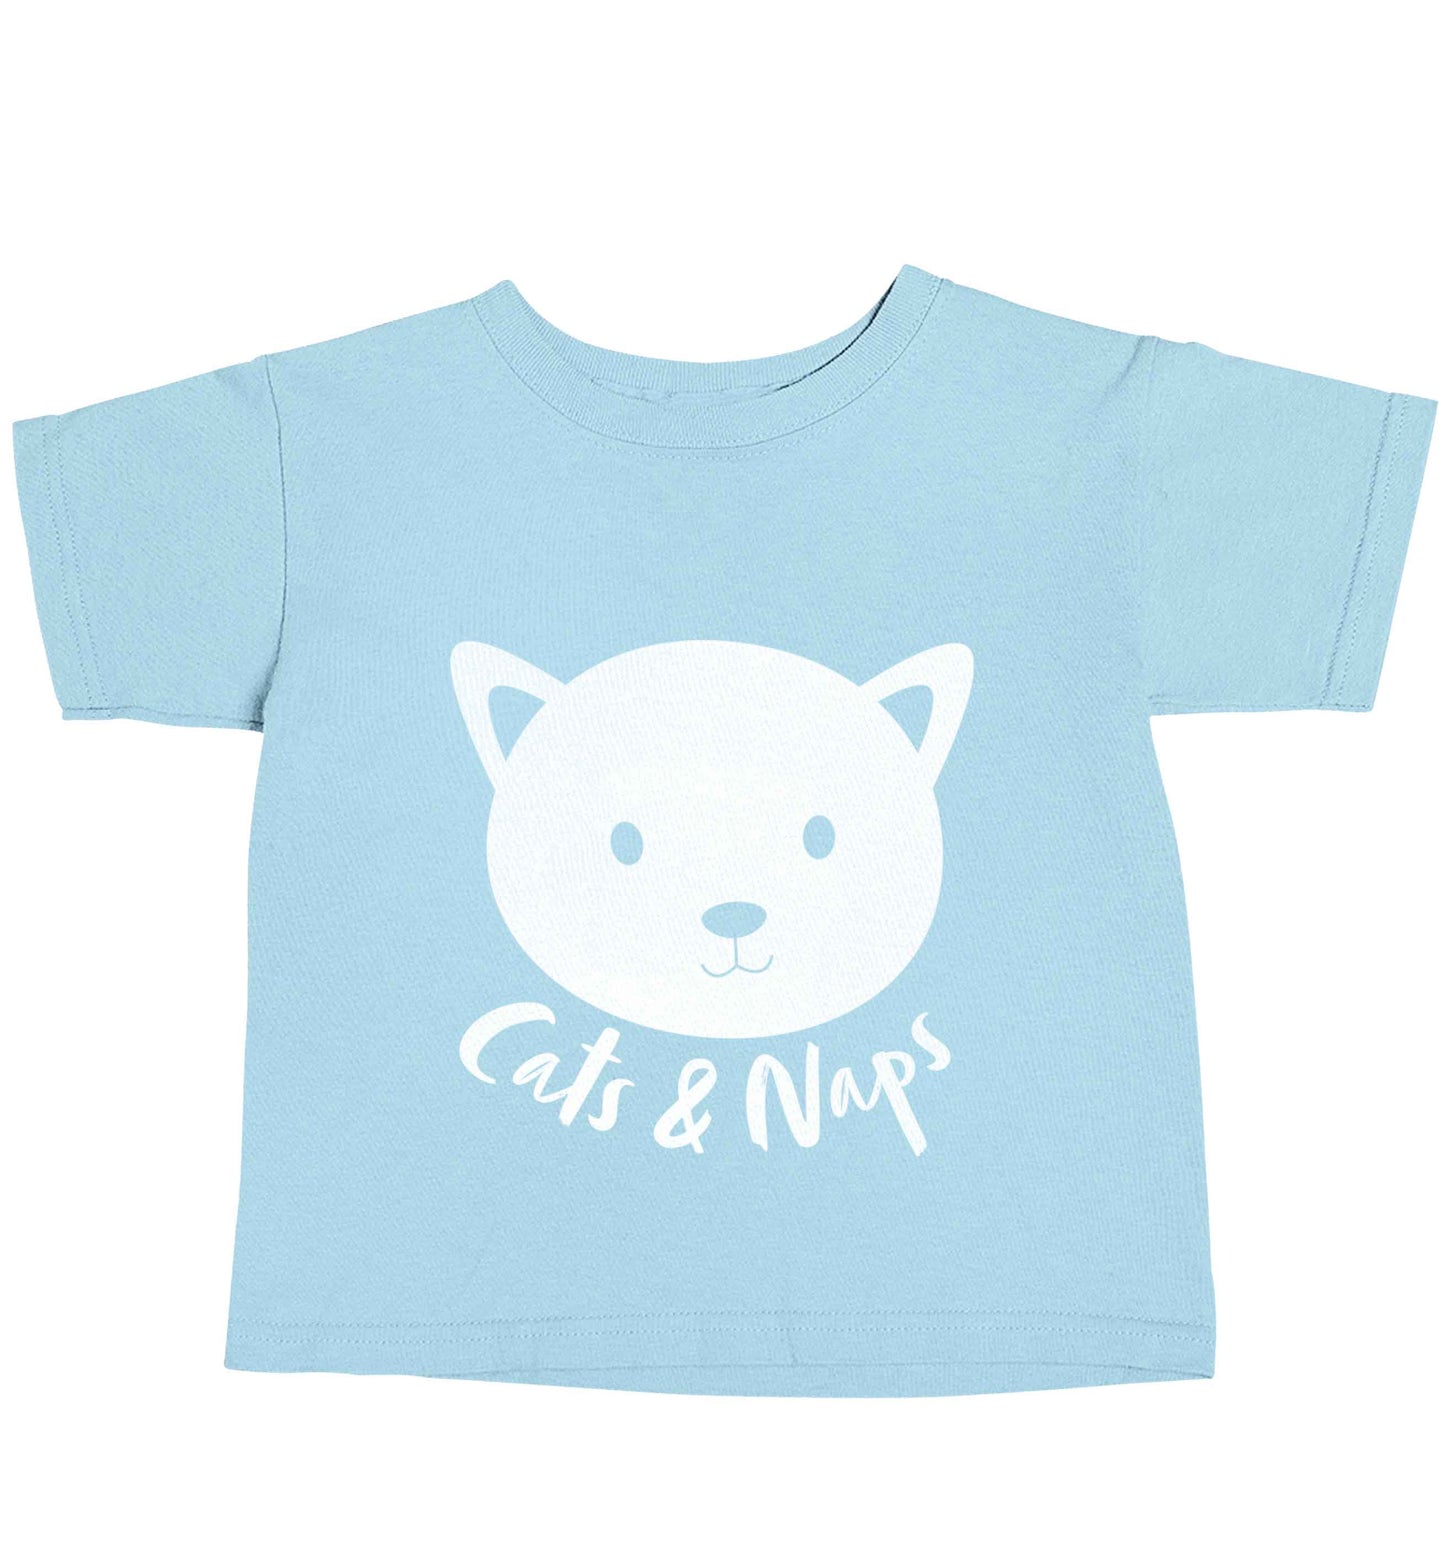 Cats and naps Kit light blue baby toddler Tshirt 2 Years